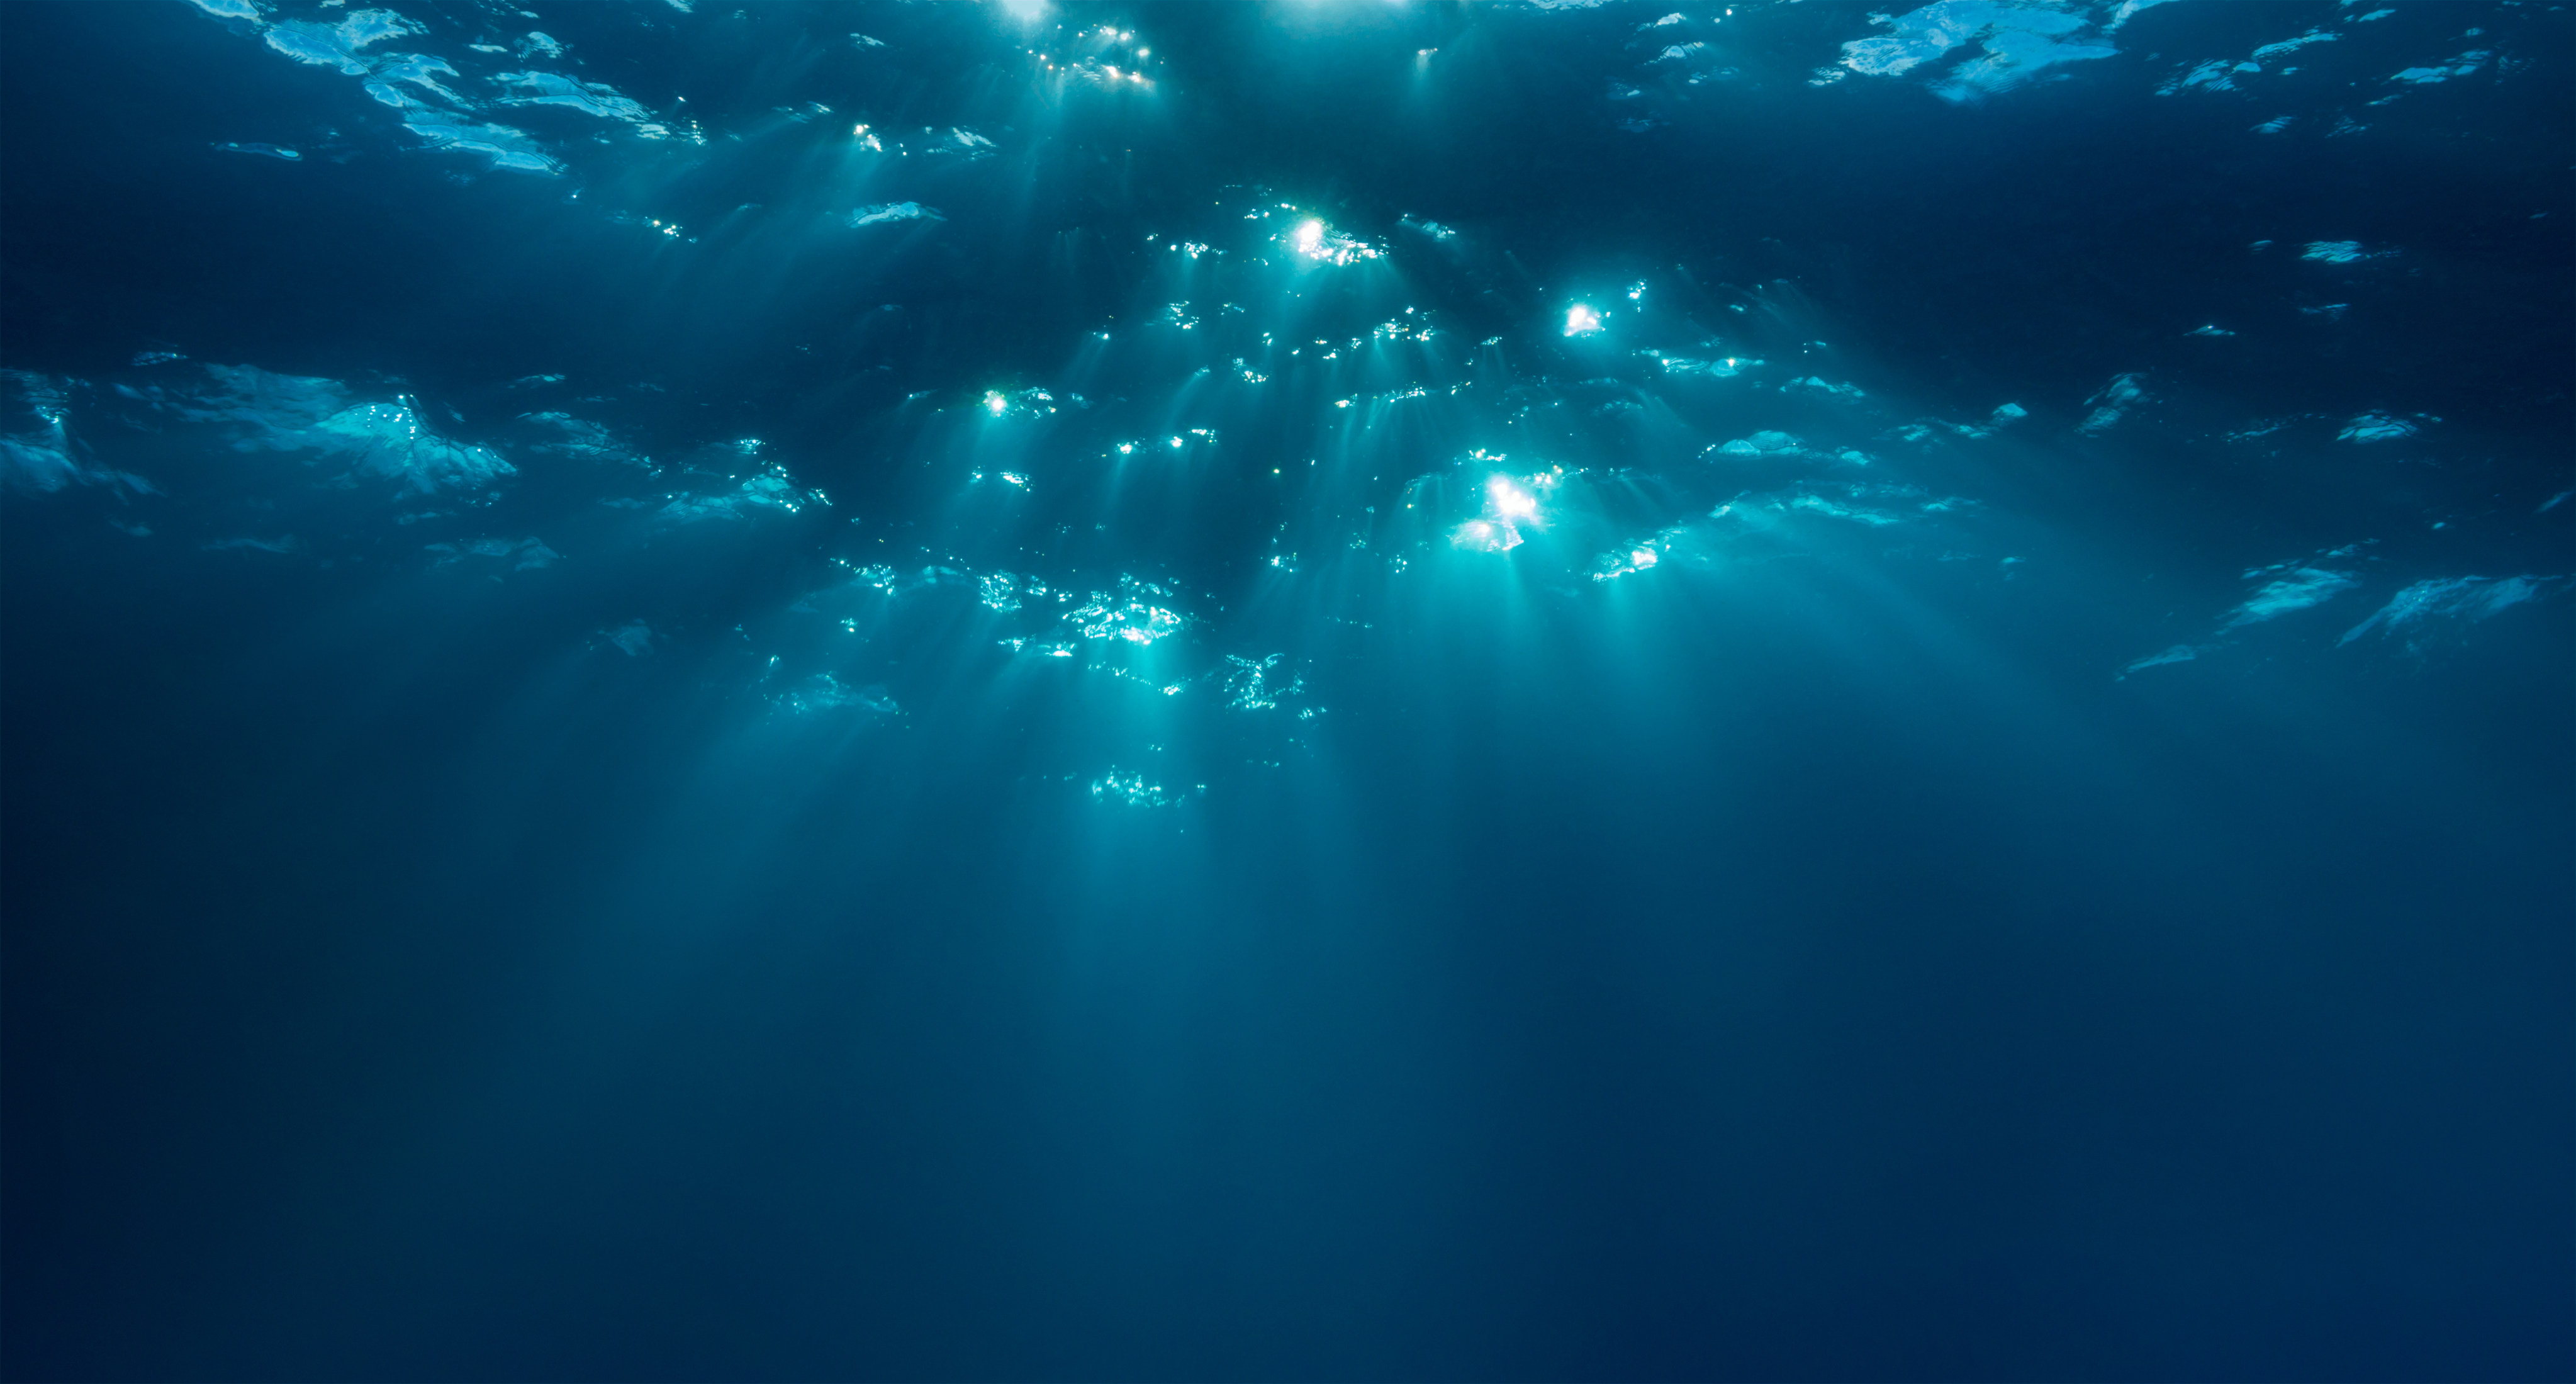 Engineers say China’s new advances could soon enable the country’s smaller unmanned submersibles to be equipped with high-powered phased array sonar. Photo: Shutterstock